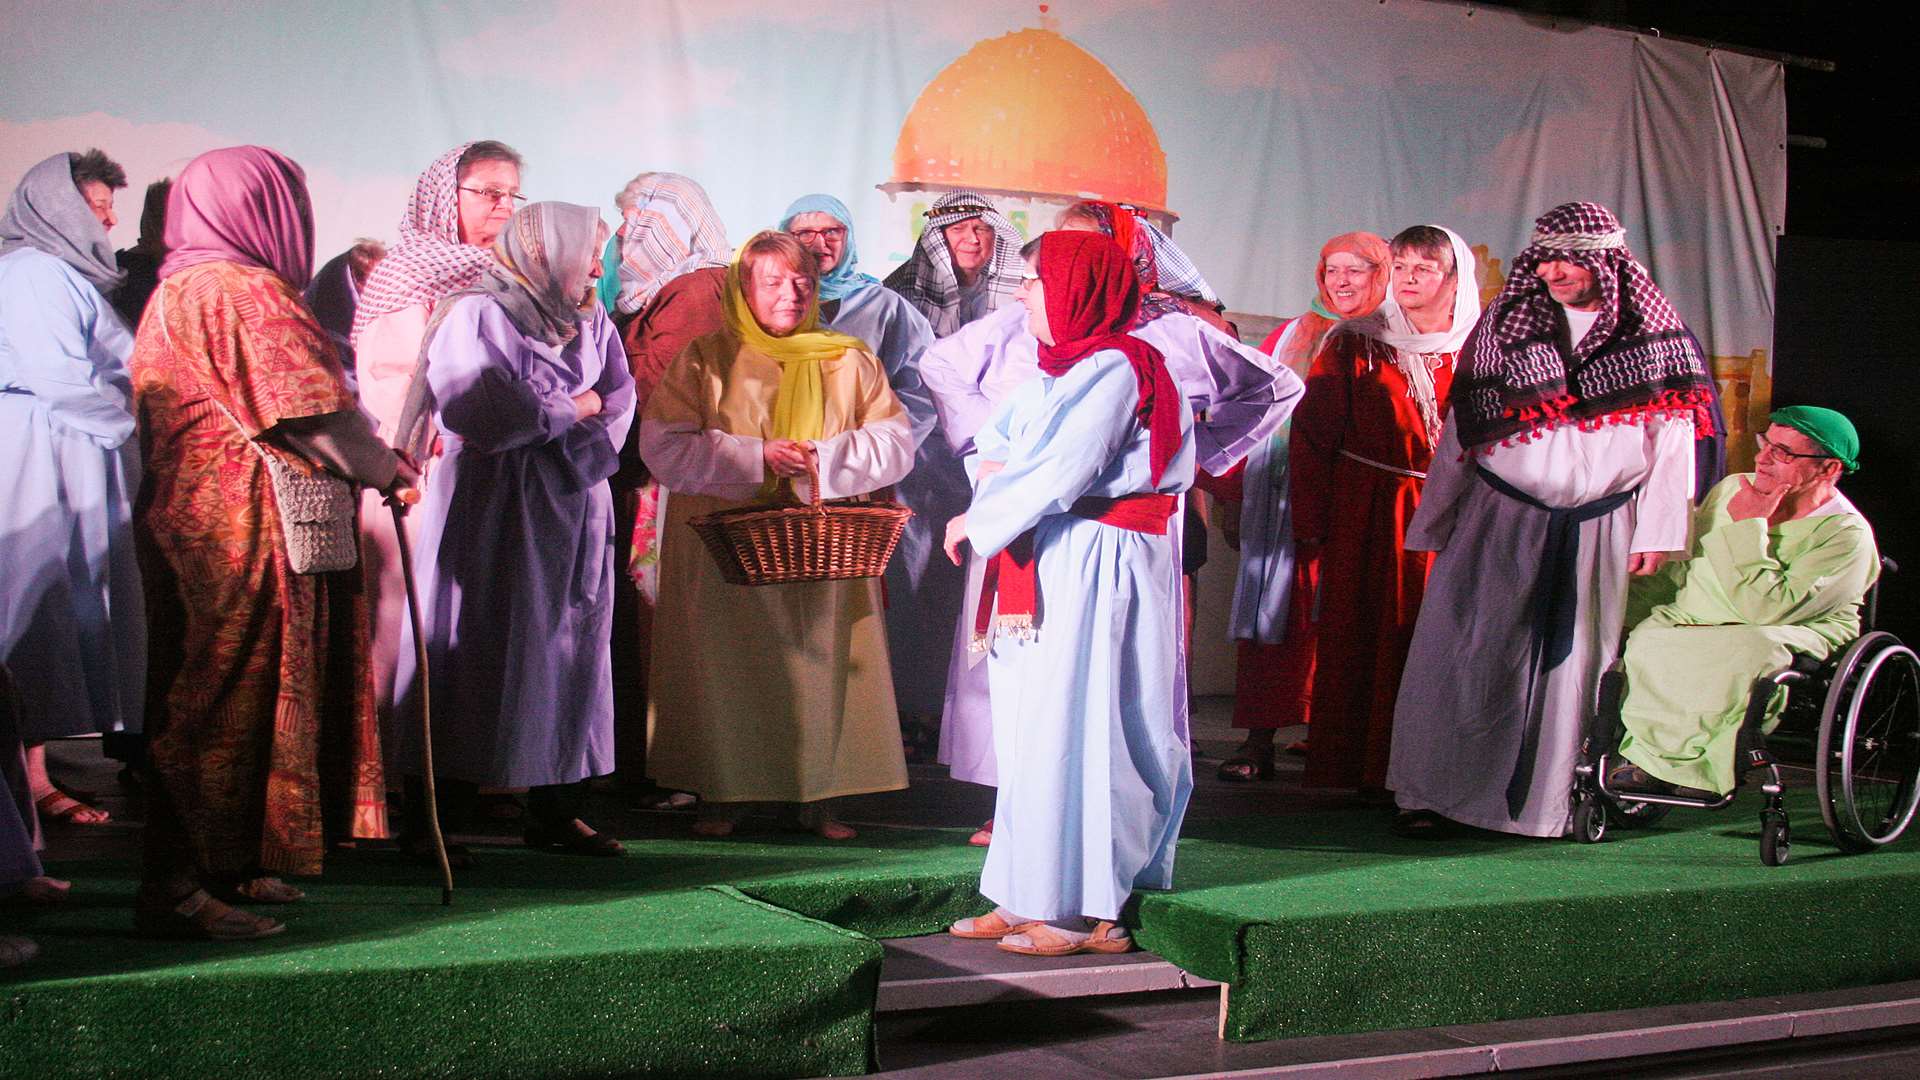 The nativity with a difference takes place at St Matthew's Church